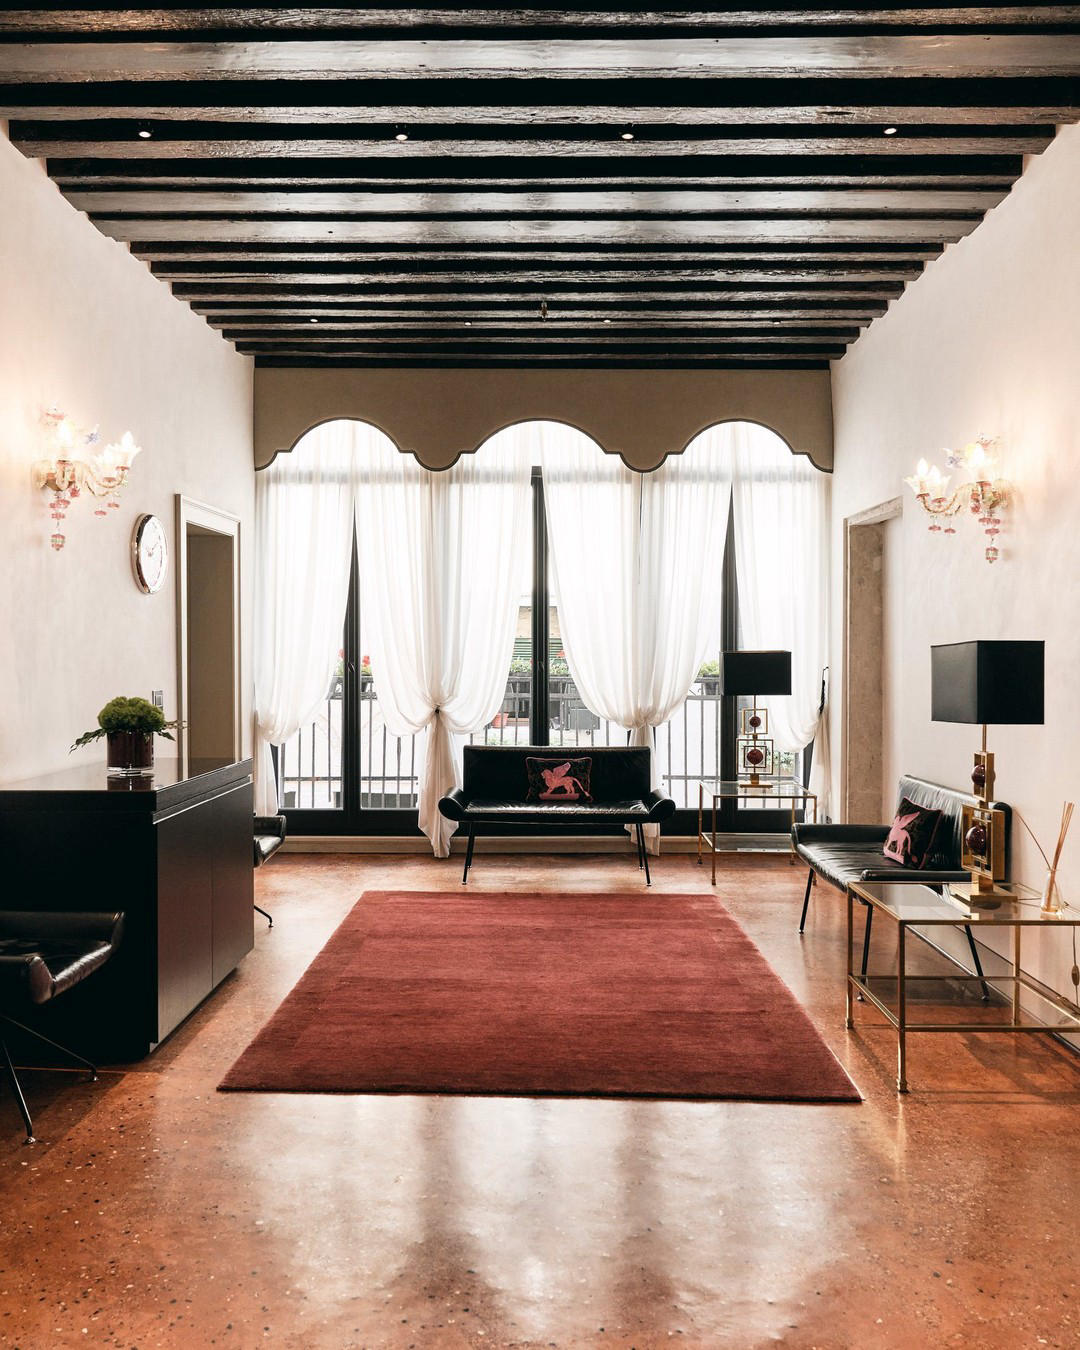 Hotel L'Orologio Venice - The interior architecture of our structure in typical Venetian style, with